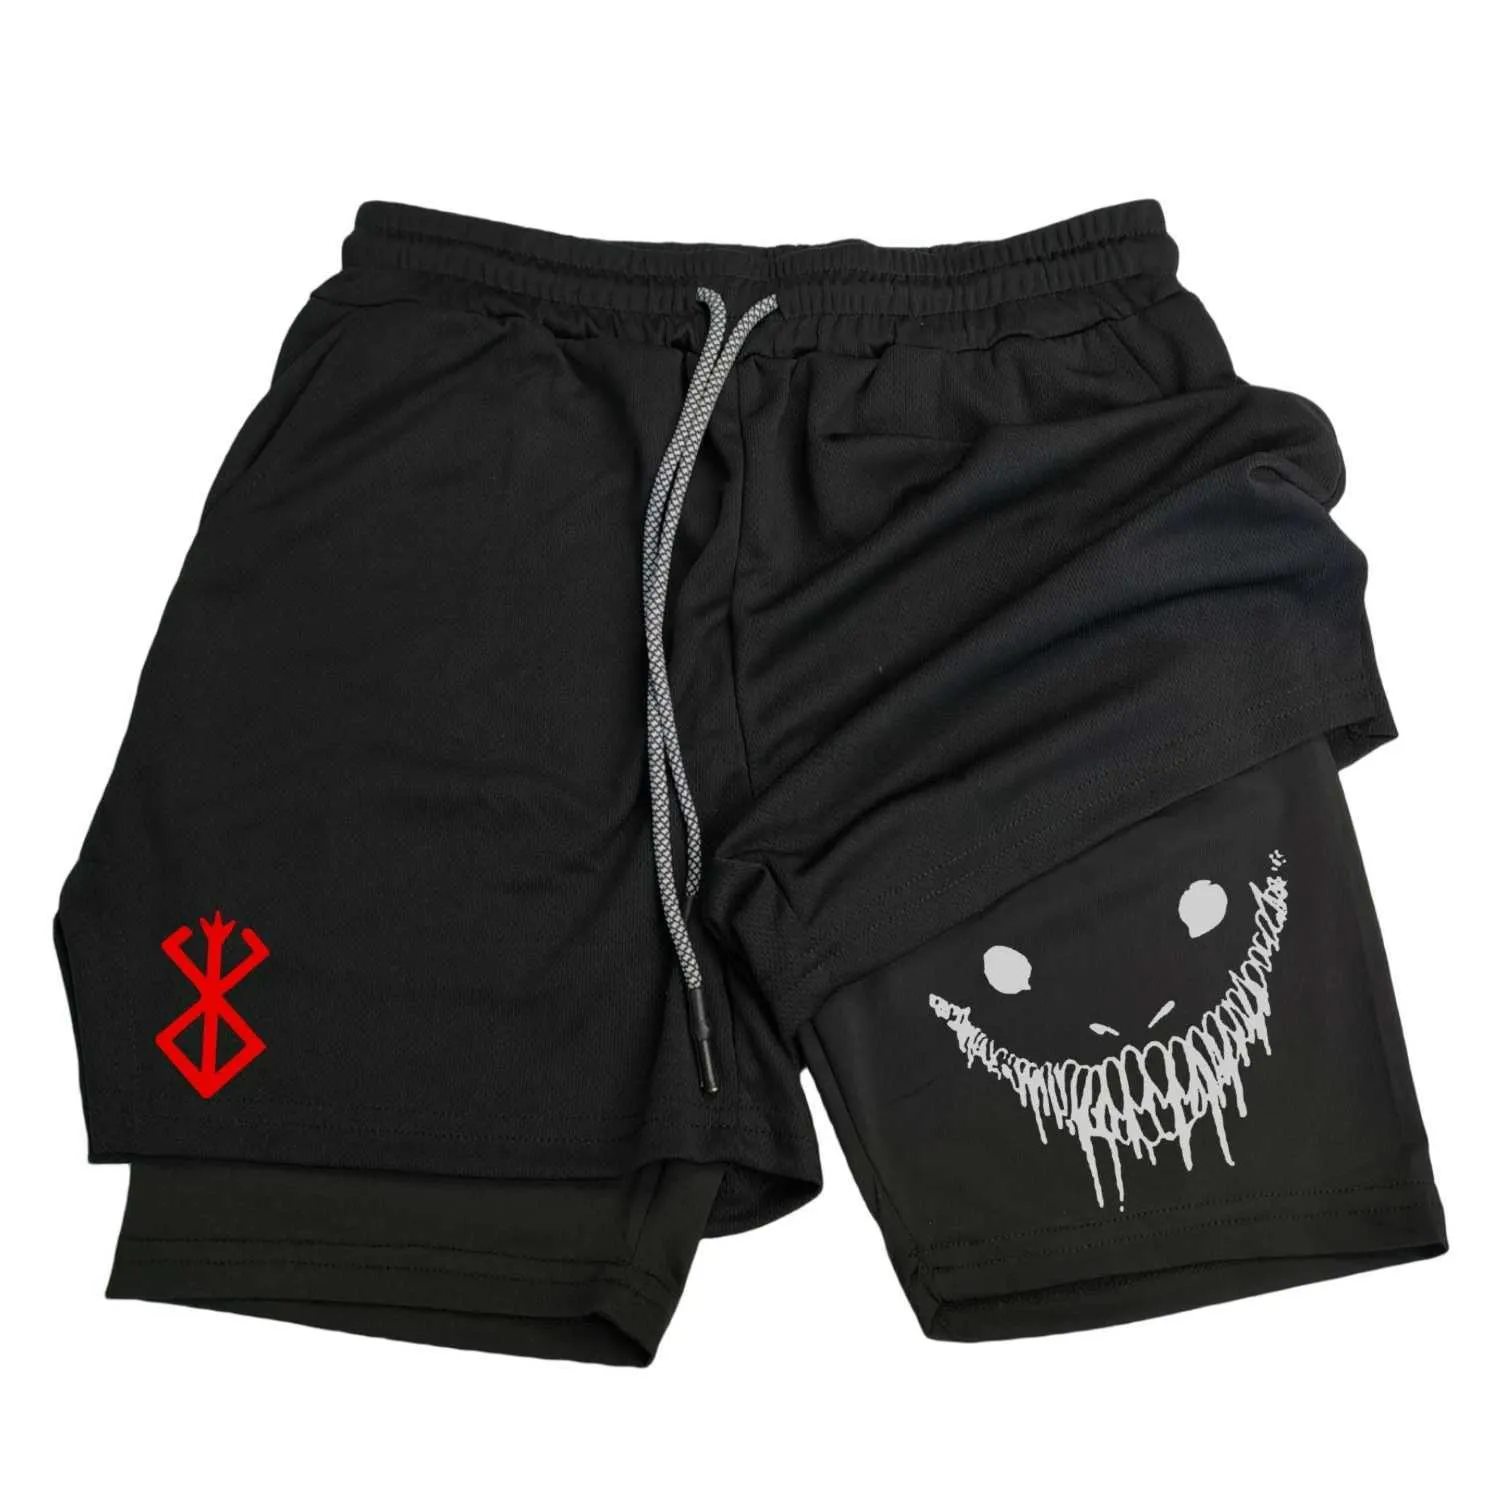 Men's Shorts 2 in 1 Sports Shorts Men Fitness Gym Training Quick Dry Shorts Workout Jogging Double Deck Summer Anime Berserk 240419 240419